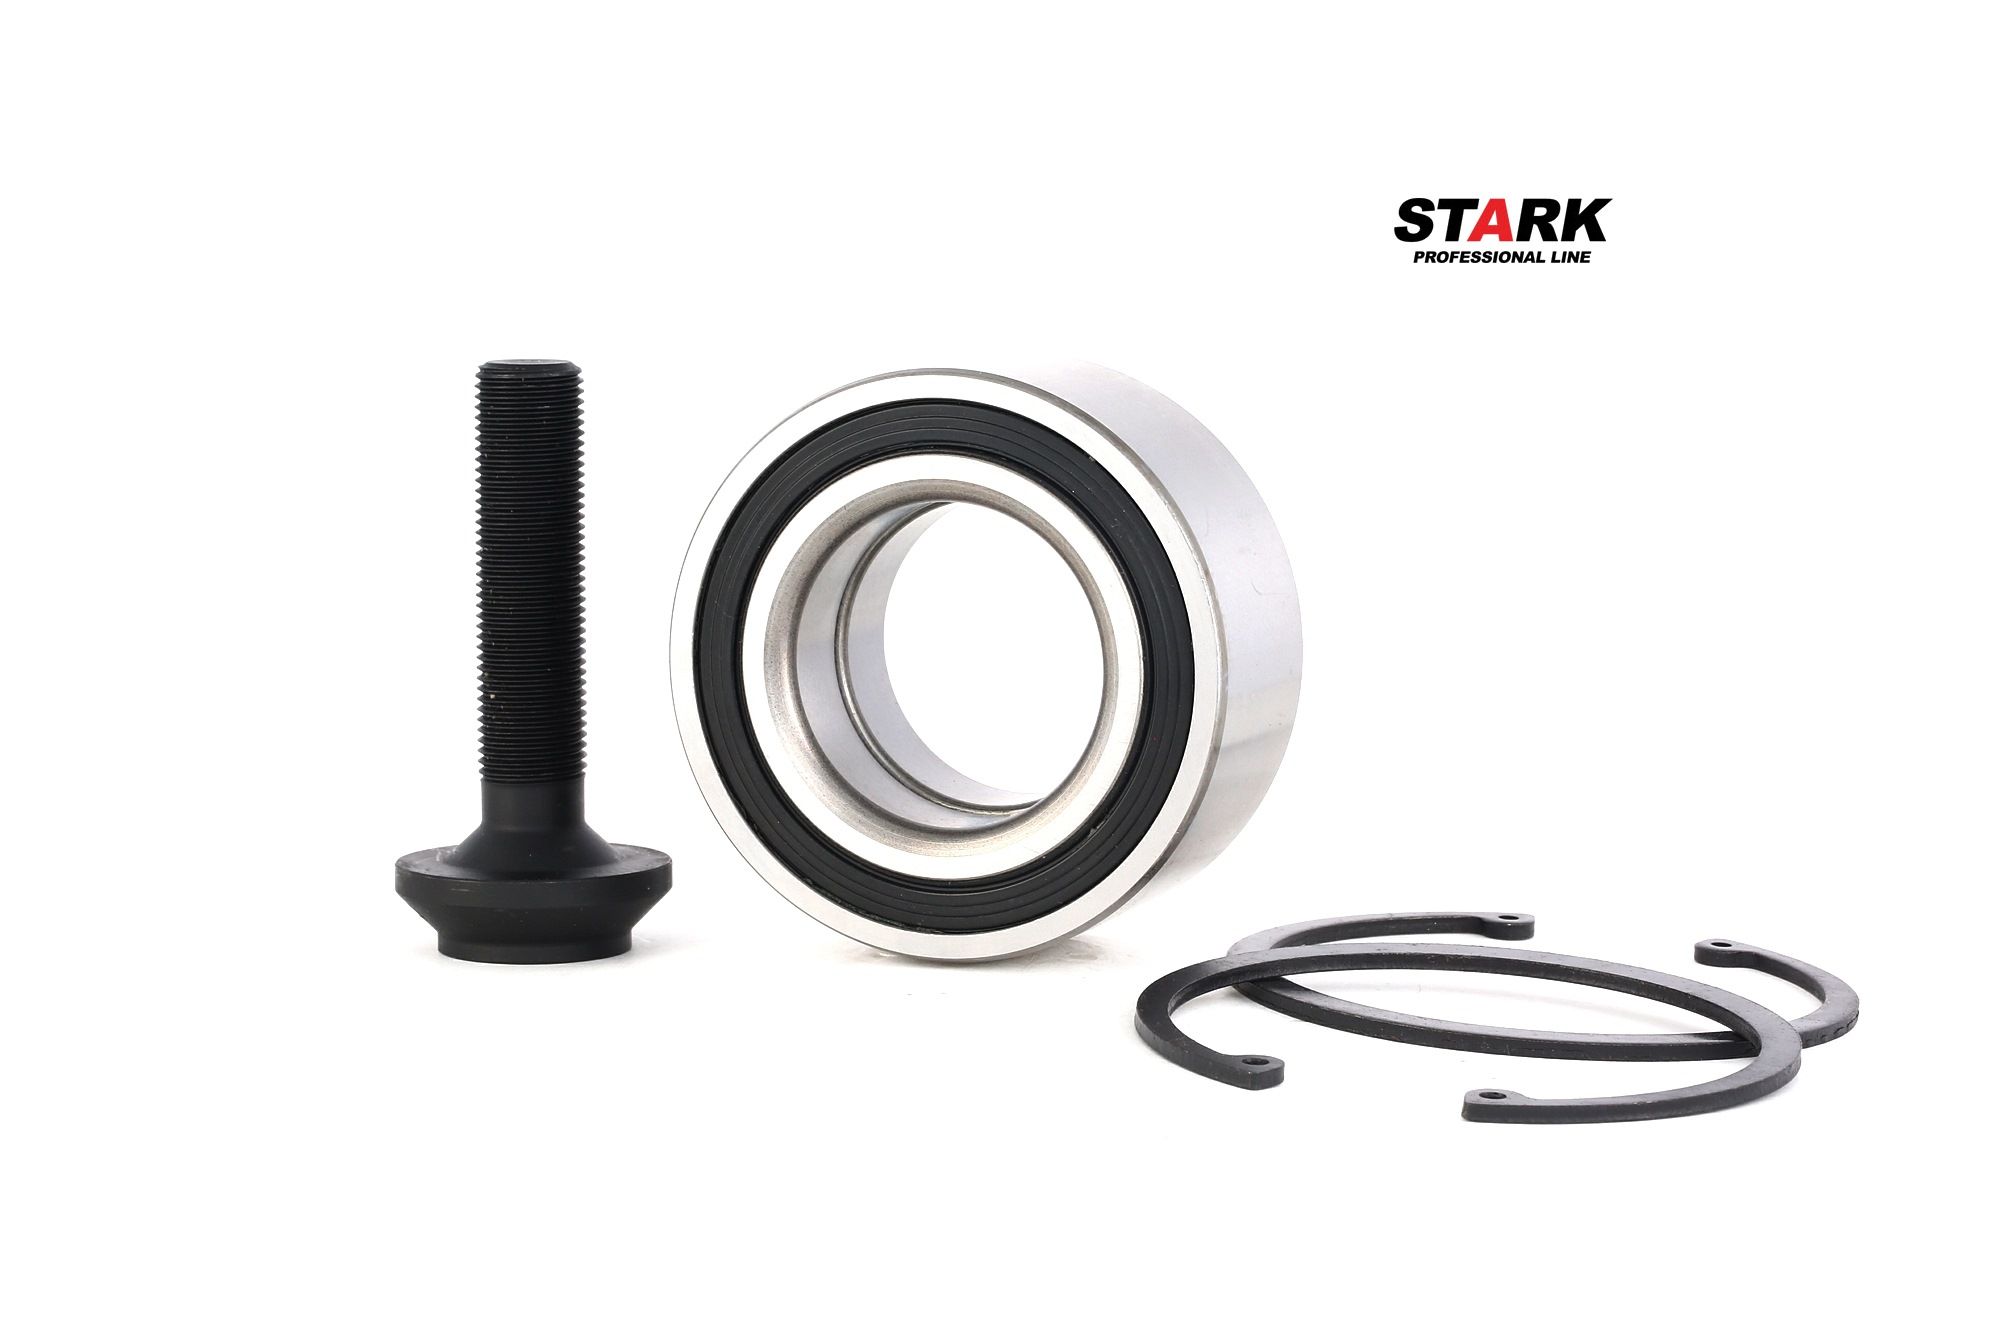 STARK SKWB-0180014 Wheel bearing kit Front axle both sides, Rear Axle both sides, without ABS sensor ring, with screw, 82 mm